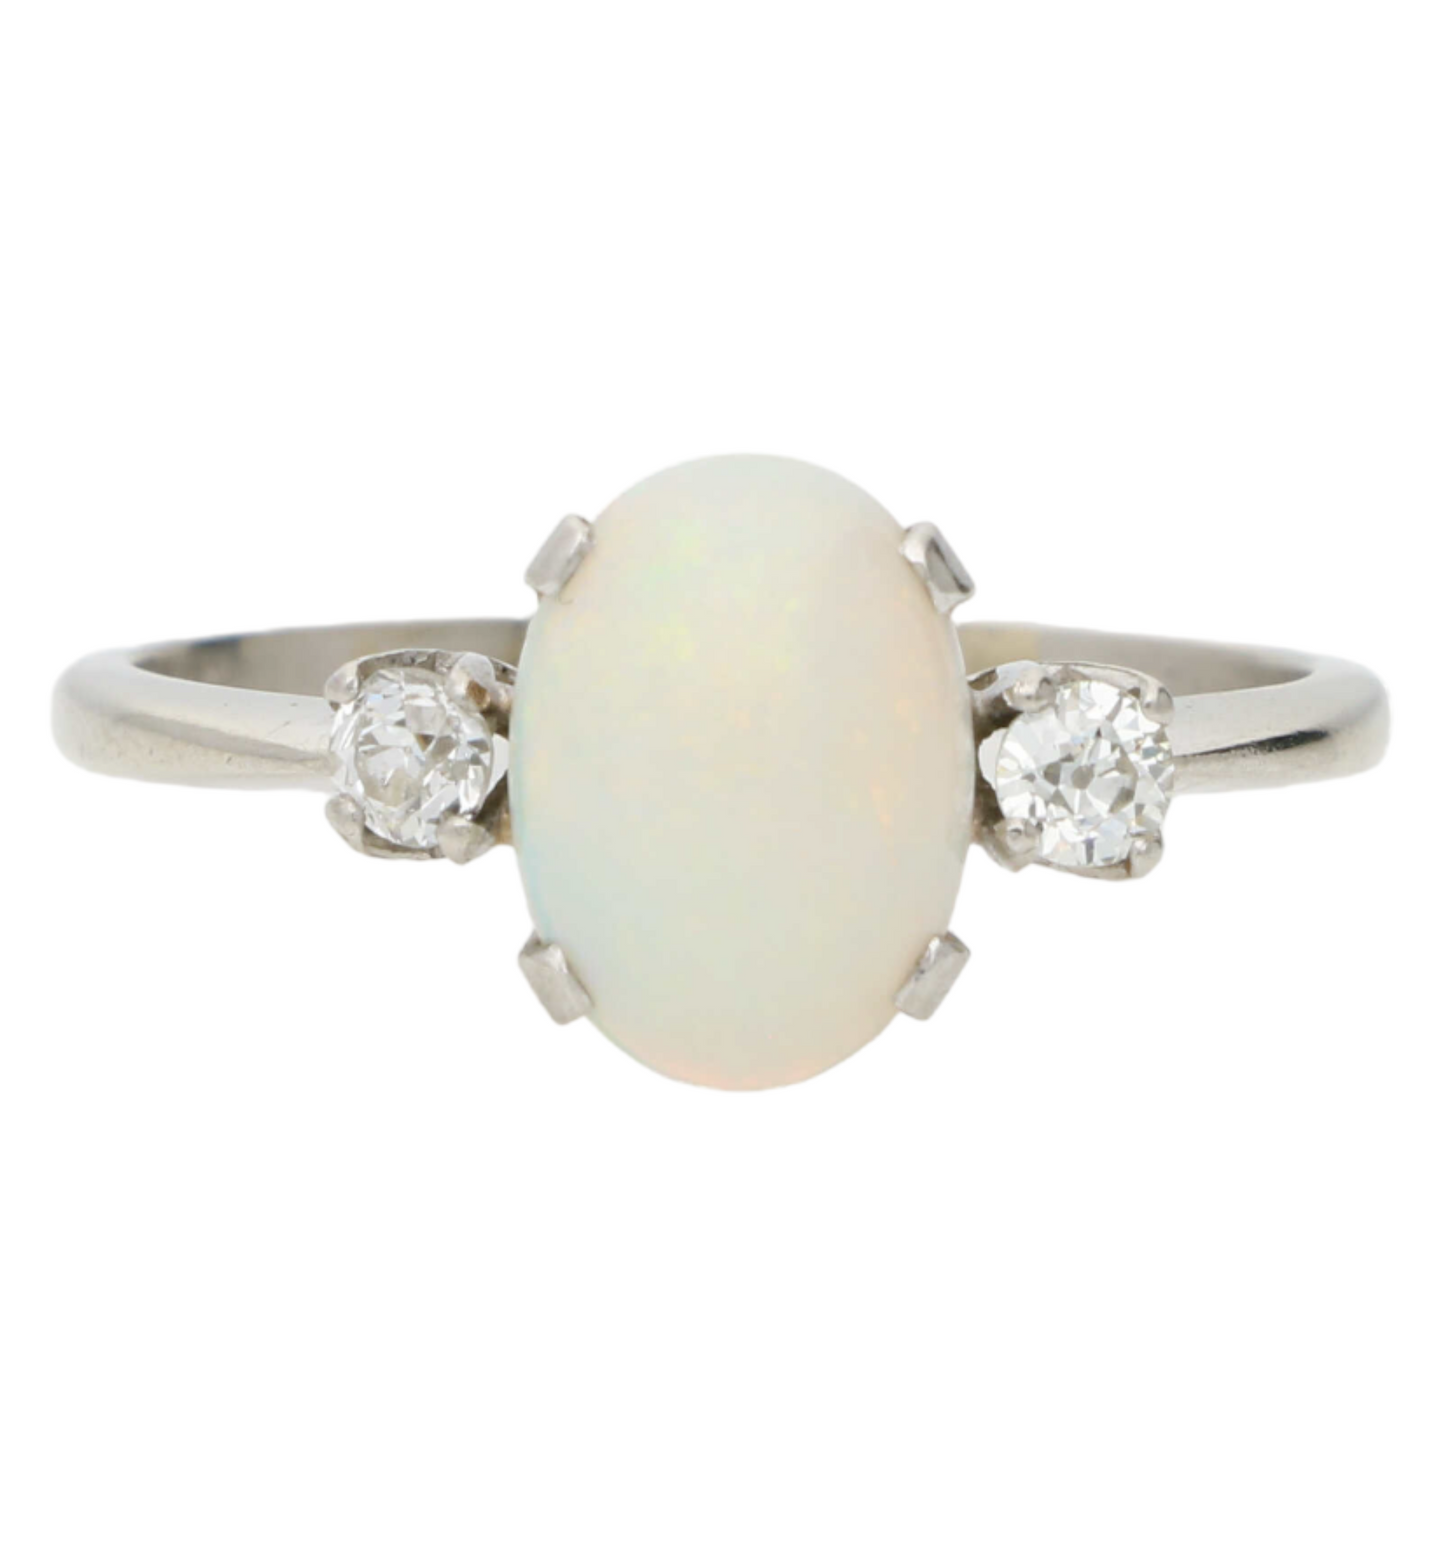 Platinum opal and old cut diamond 3 stone ring